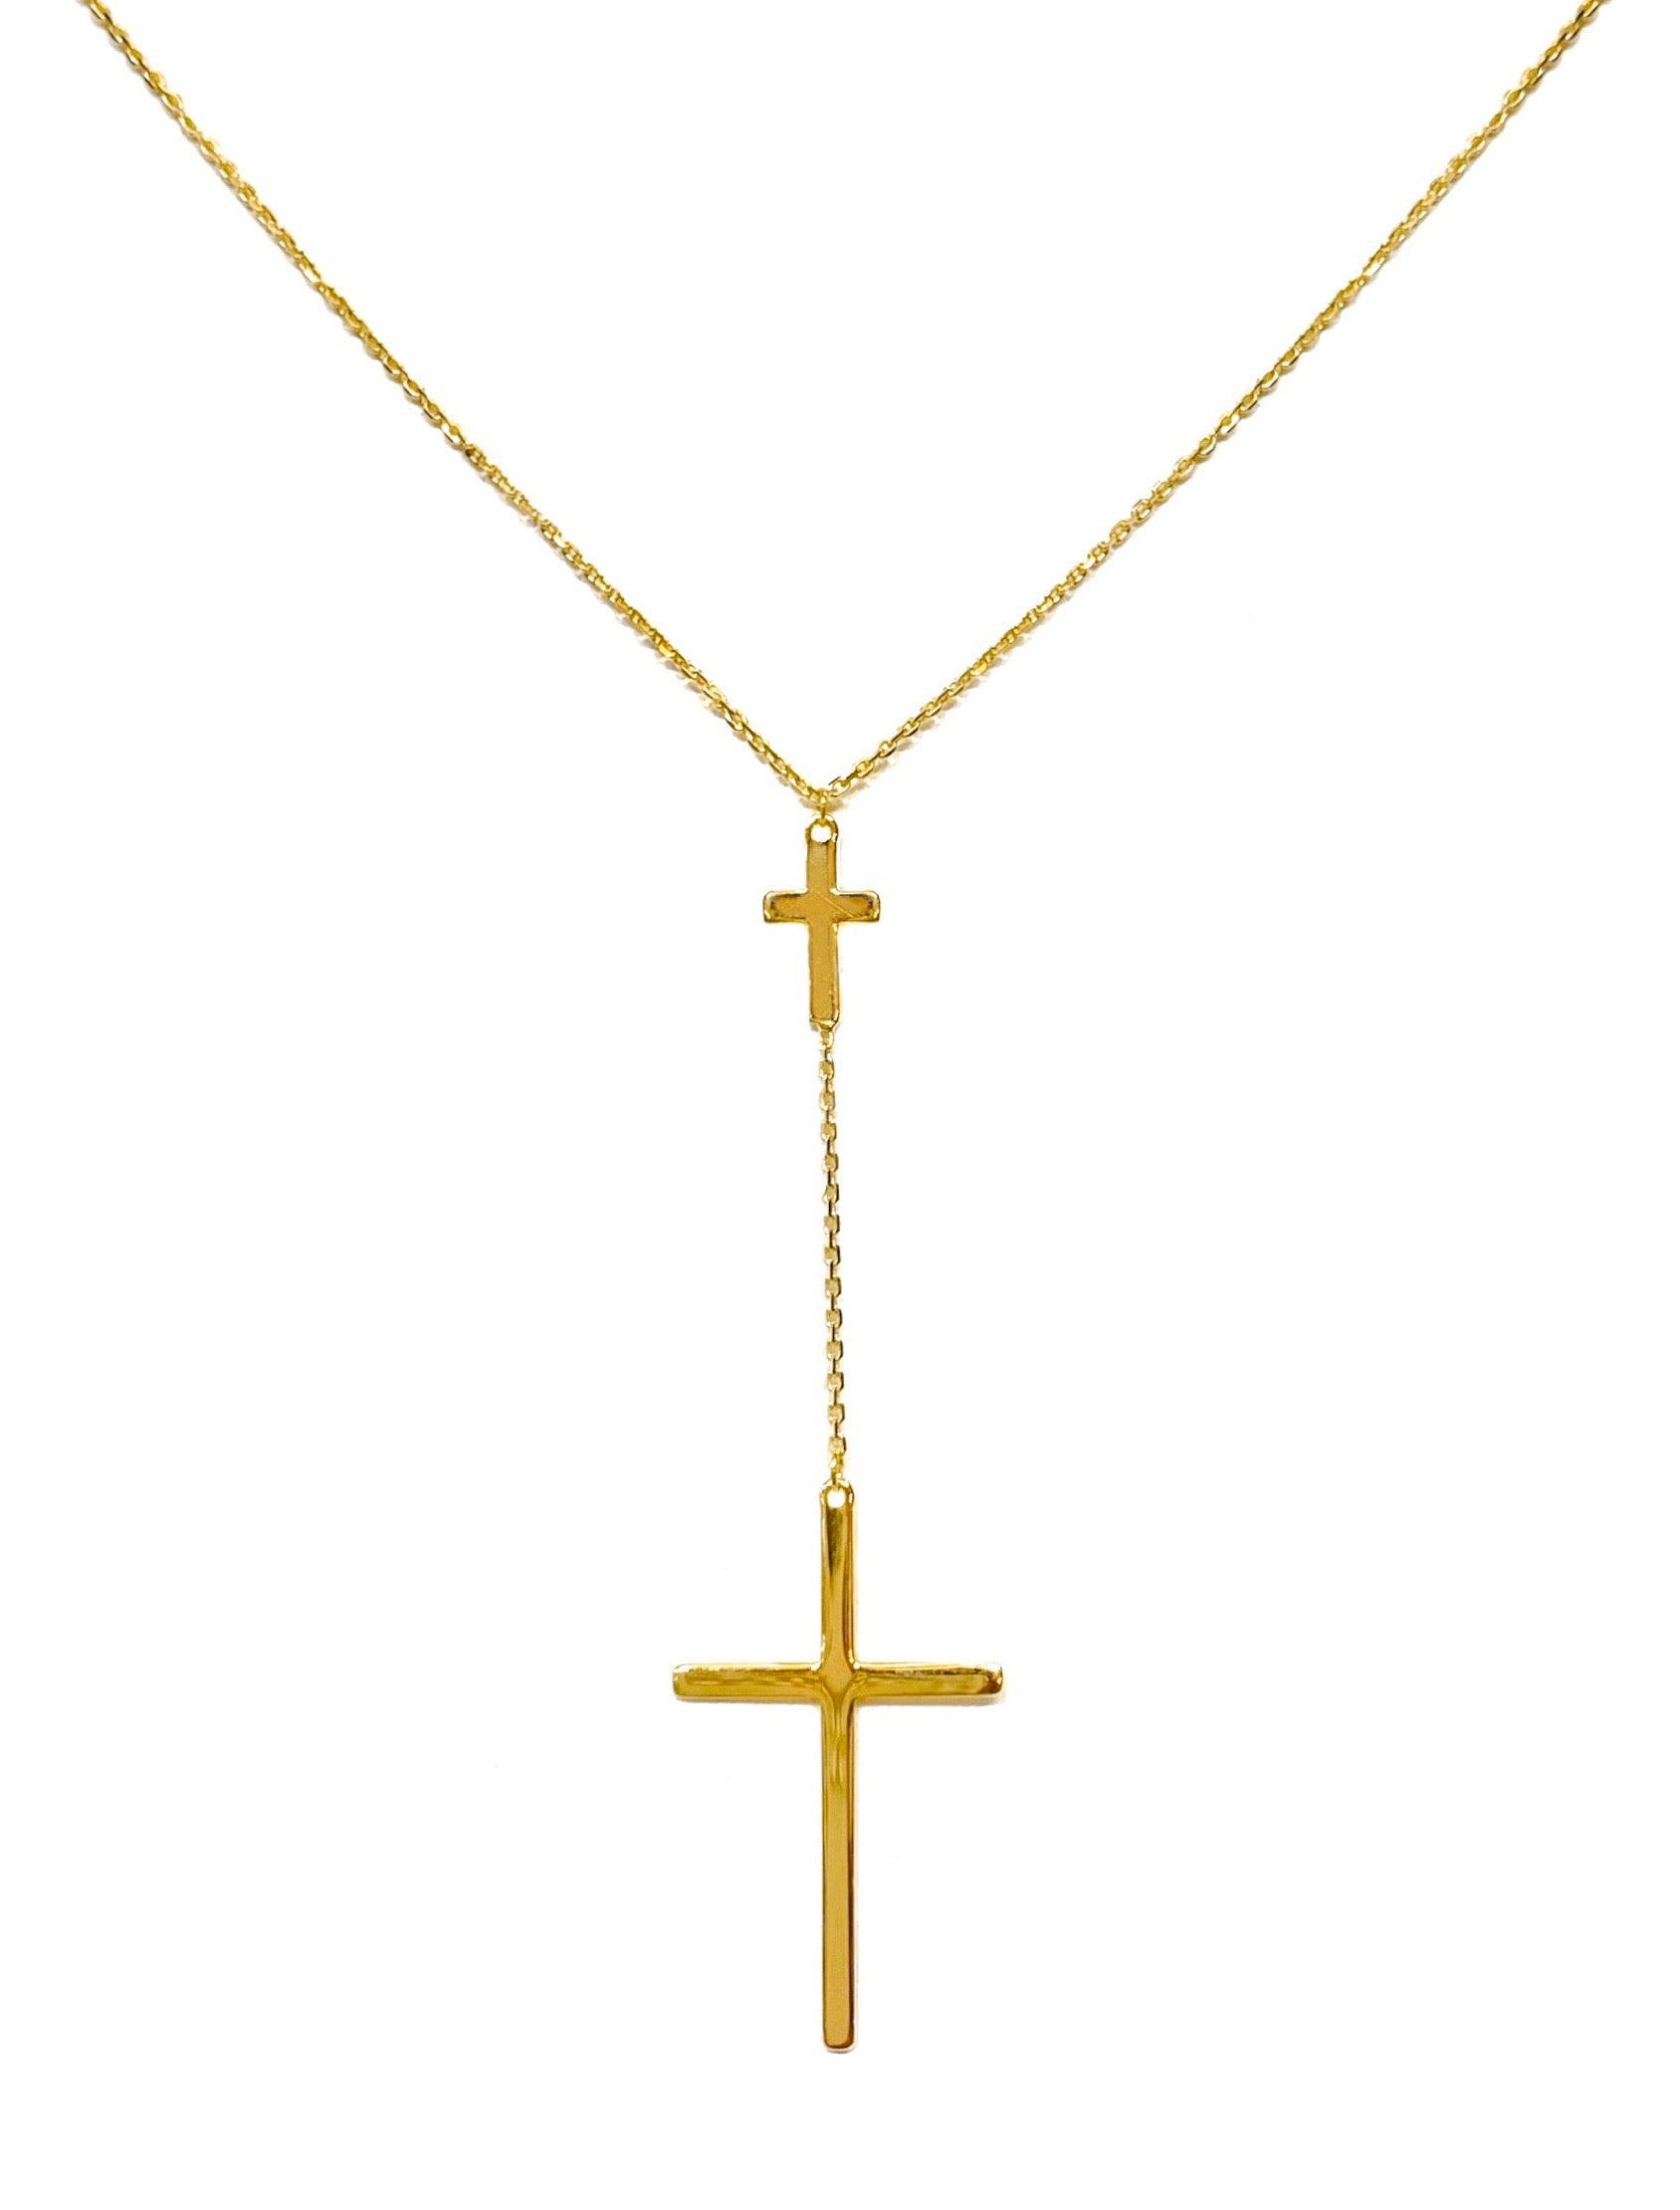 14K YELLOW GOLD DOUBLE CROSS LARIAT NECKLACE